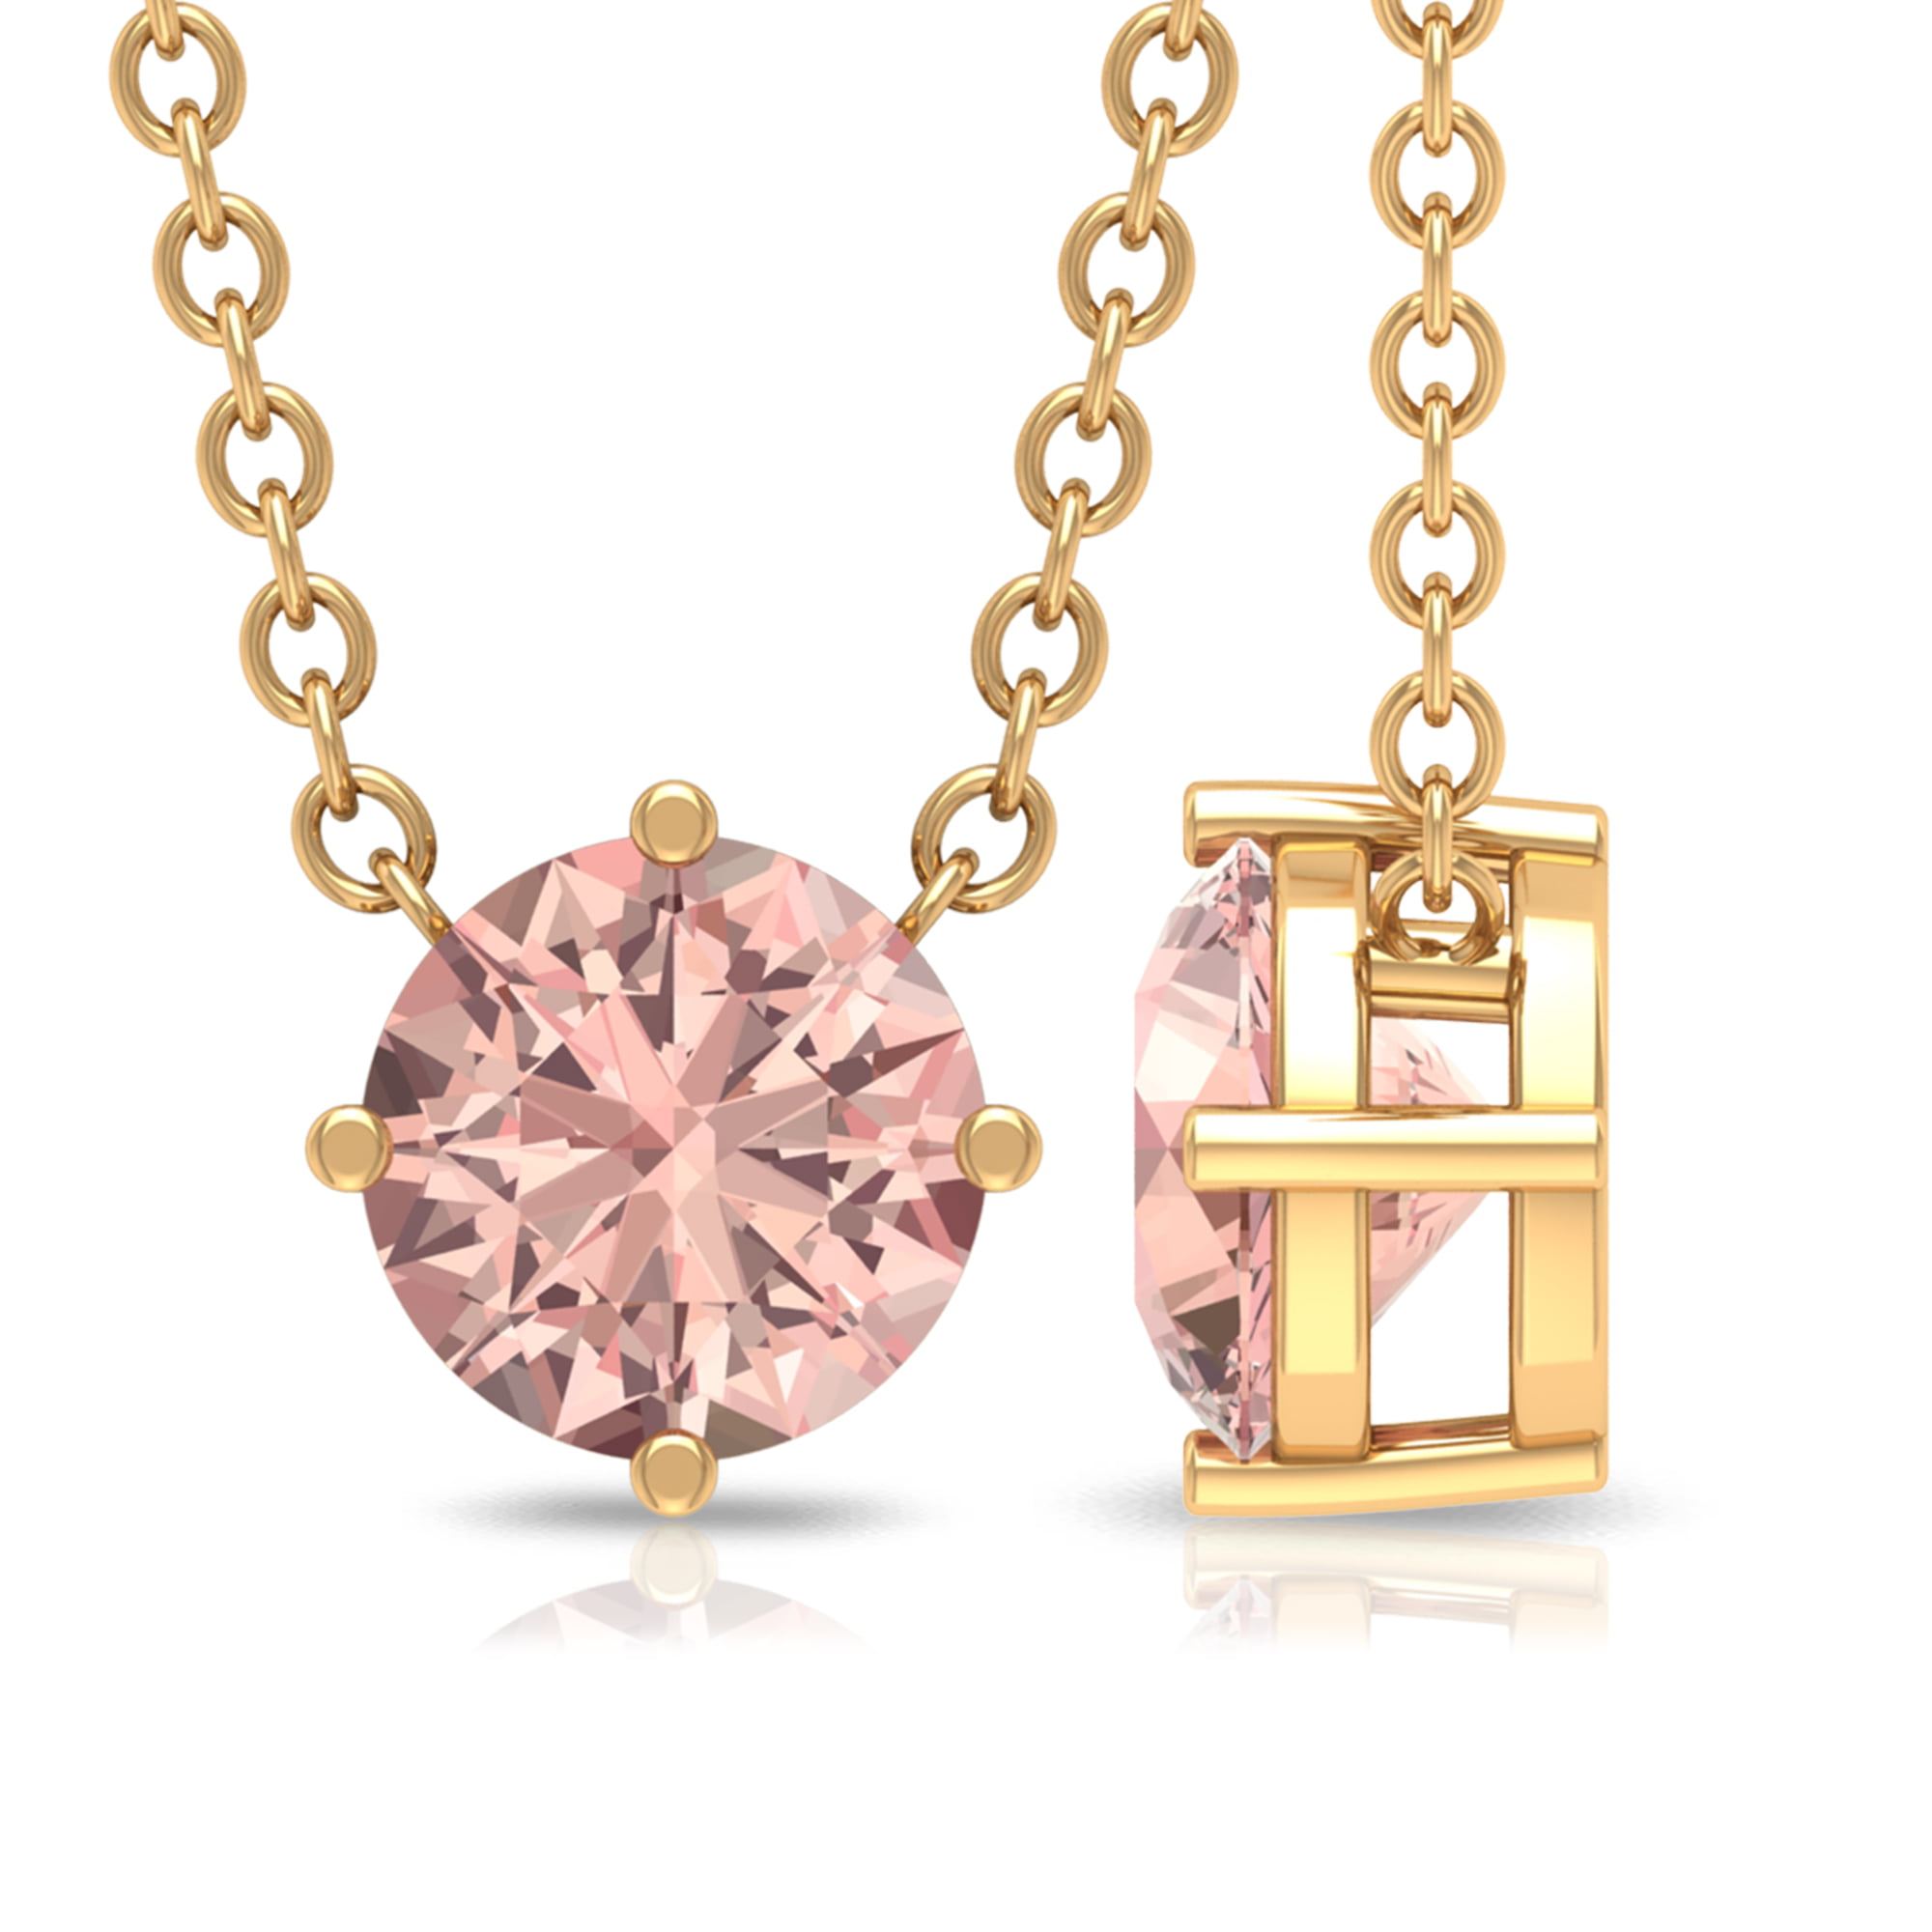 2Ct Round Cut Morganite Solitaire Pendant Solid 14K Rose Gold Finish Free Chain